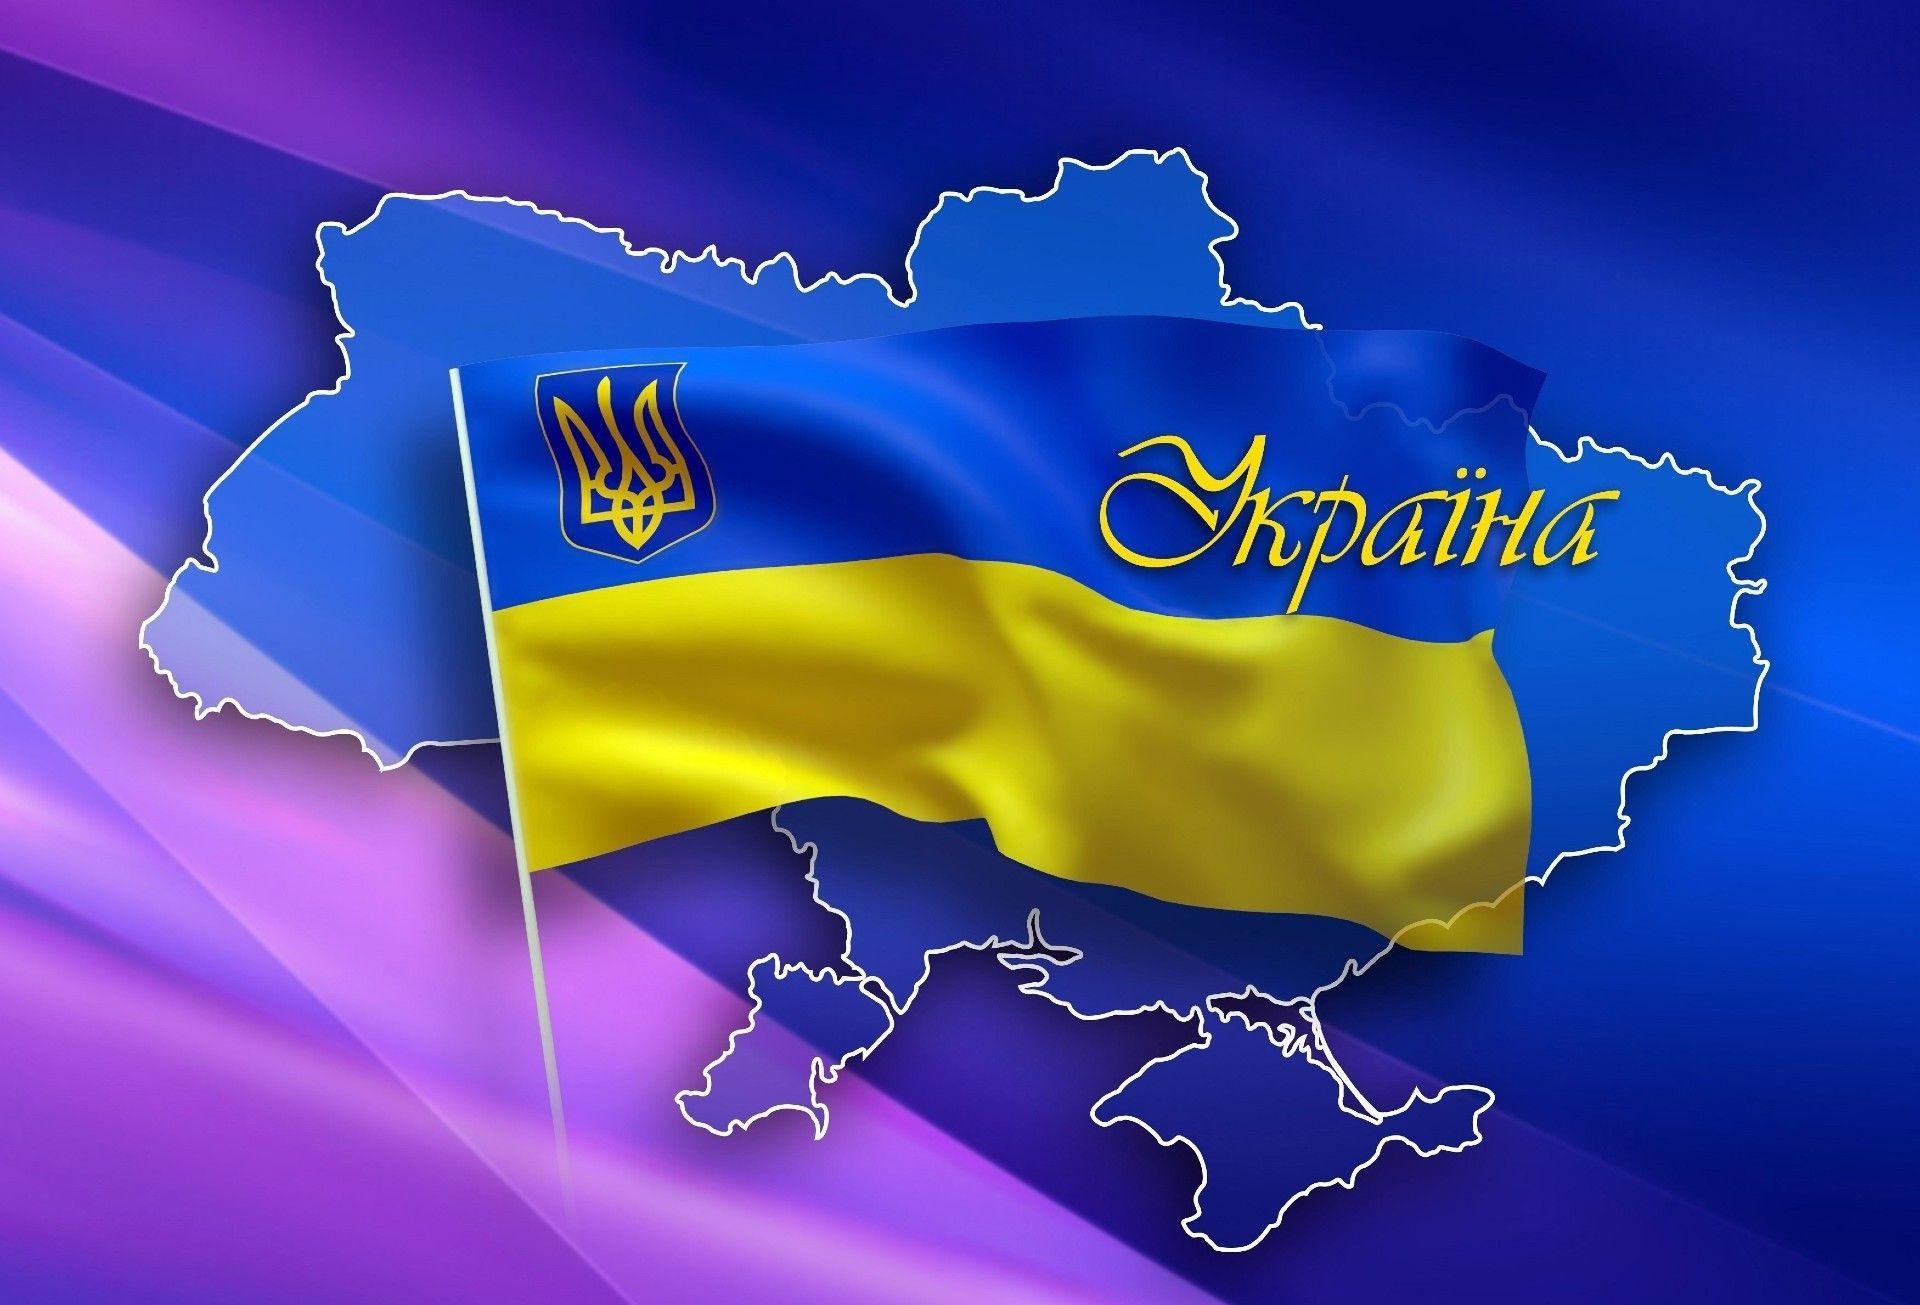 Map of Ukraine and Ukraine flag. Android wallpaper for free